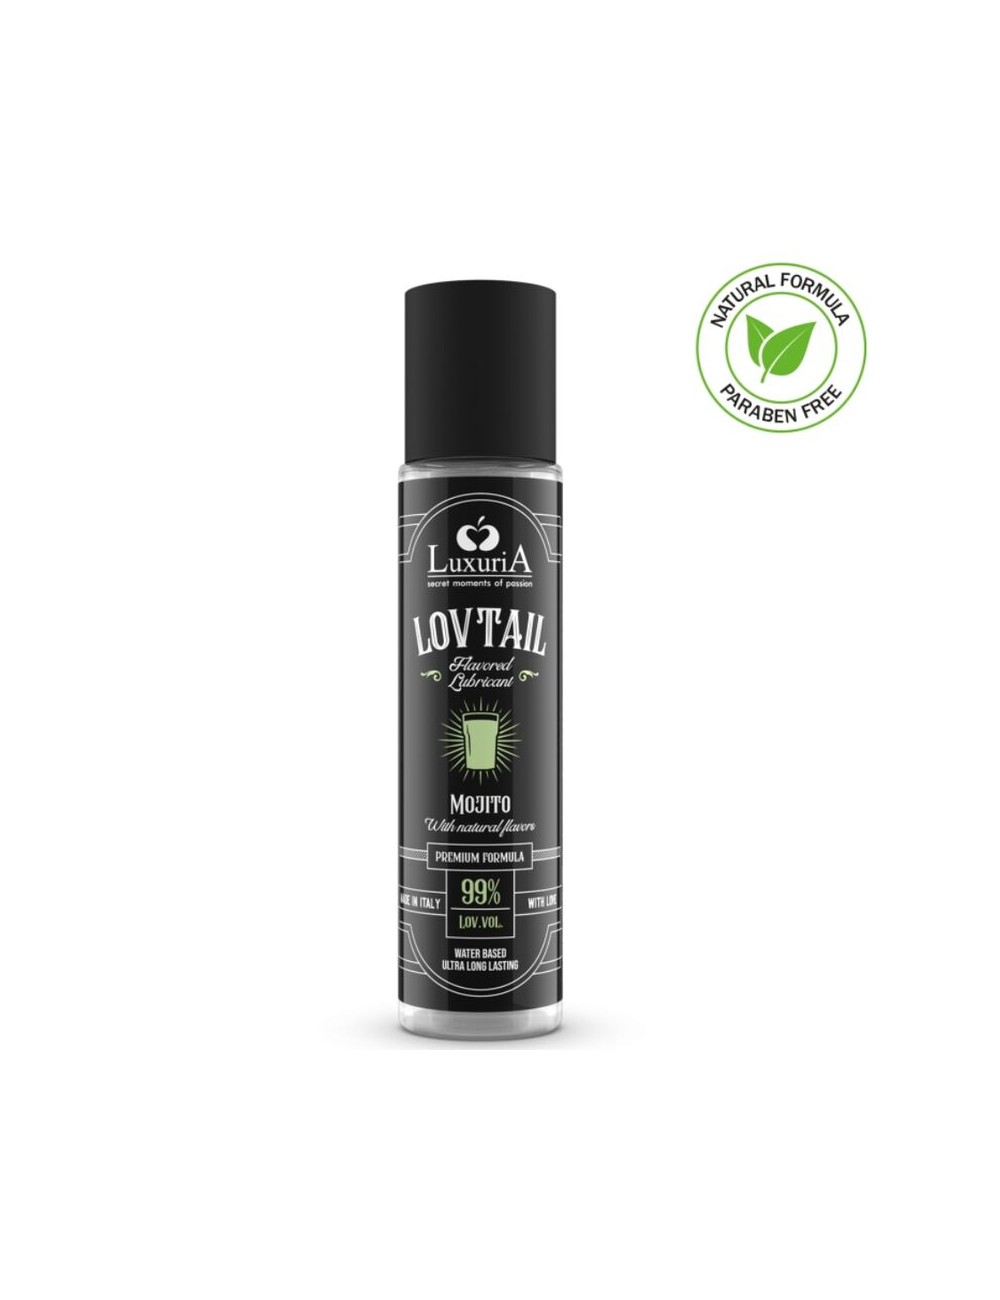 LUXURIA WATER BASED LOVTAIL LUBRICANT - MOJITO 60 ML